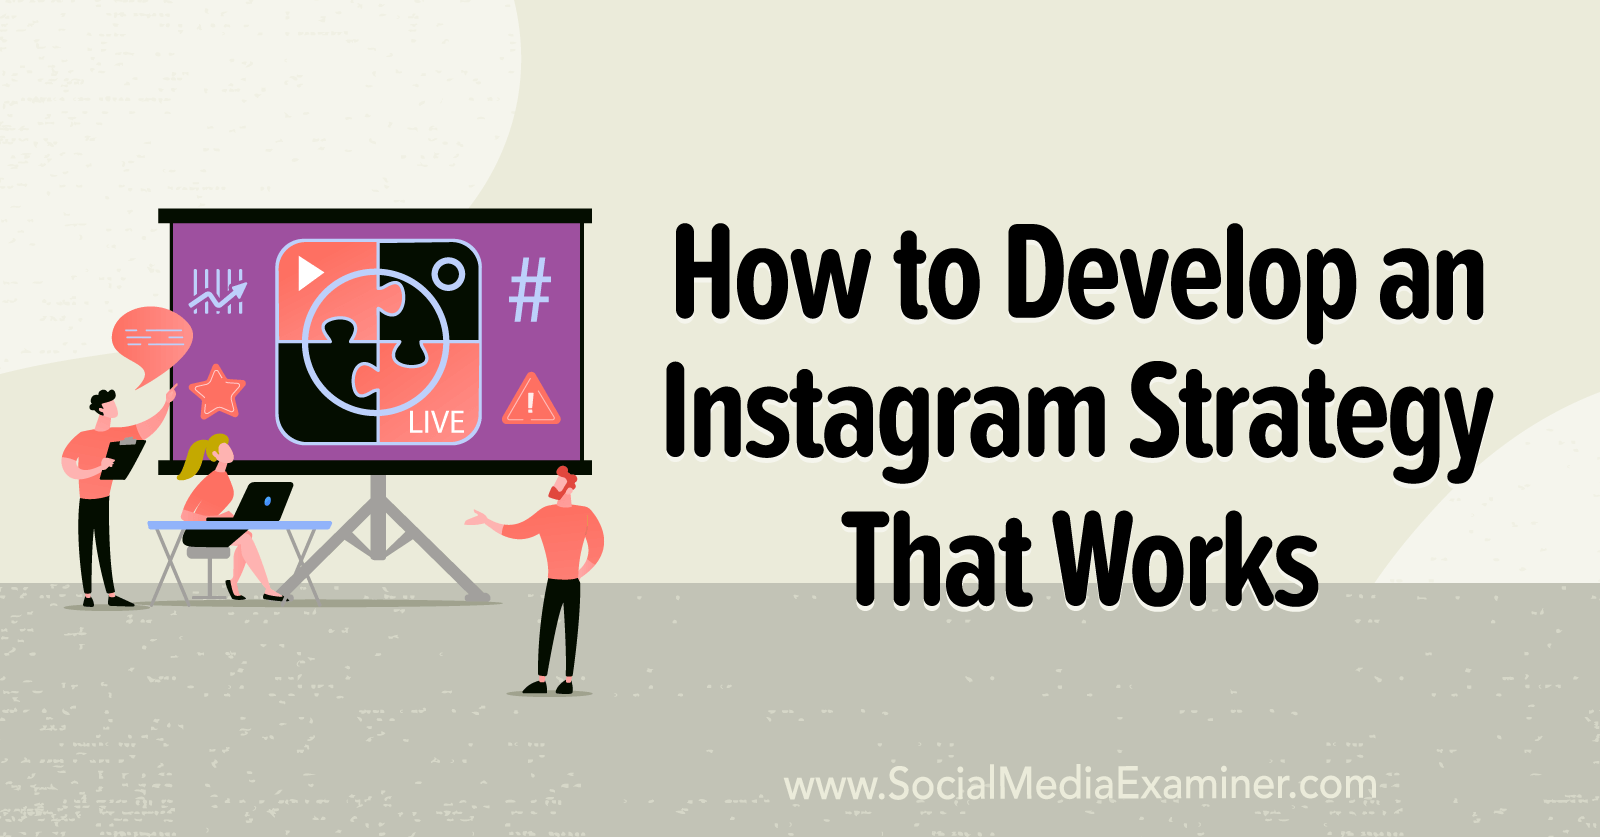 How to Develop an Instagram Strategy That Works featuring insights from Millie Adrian on the Social Media Marketing Podcast.